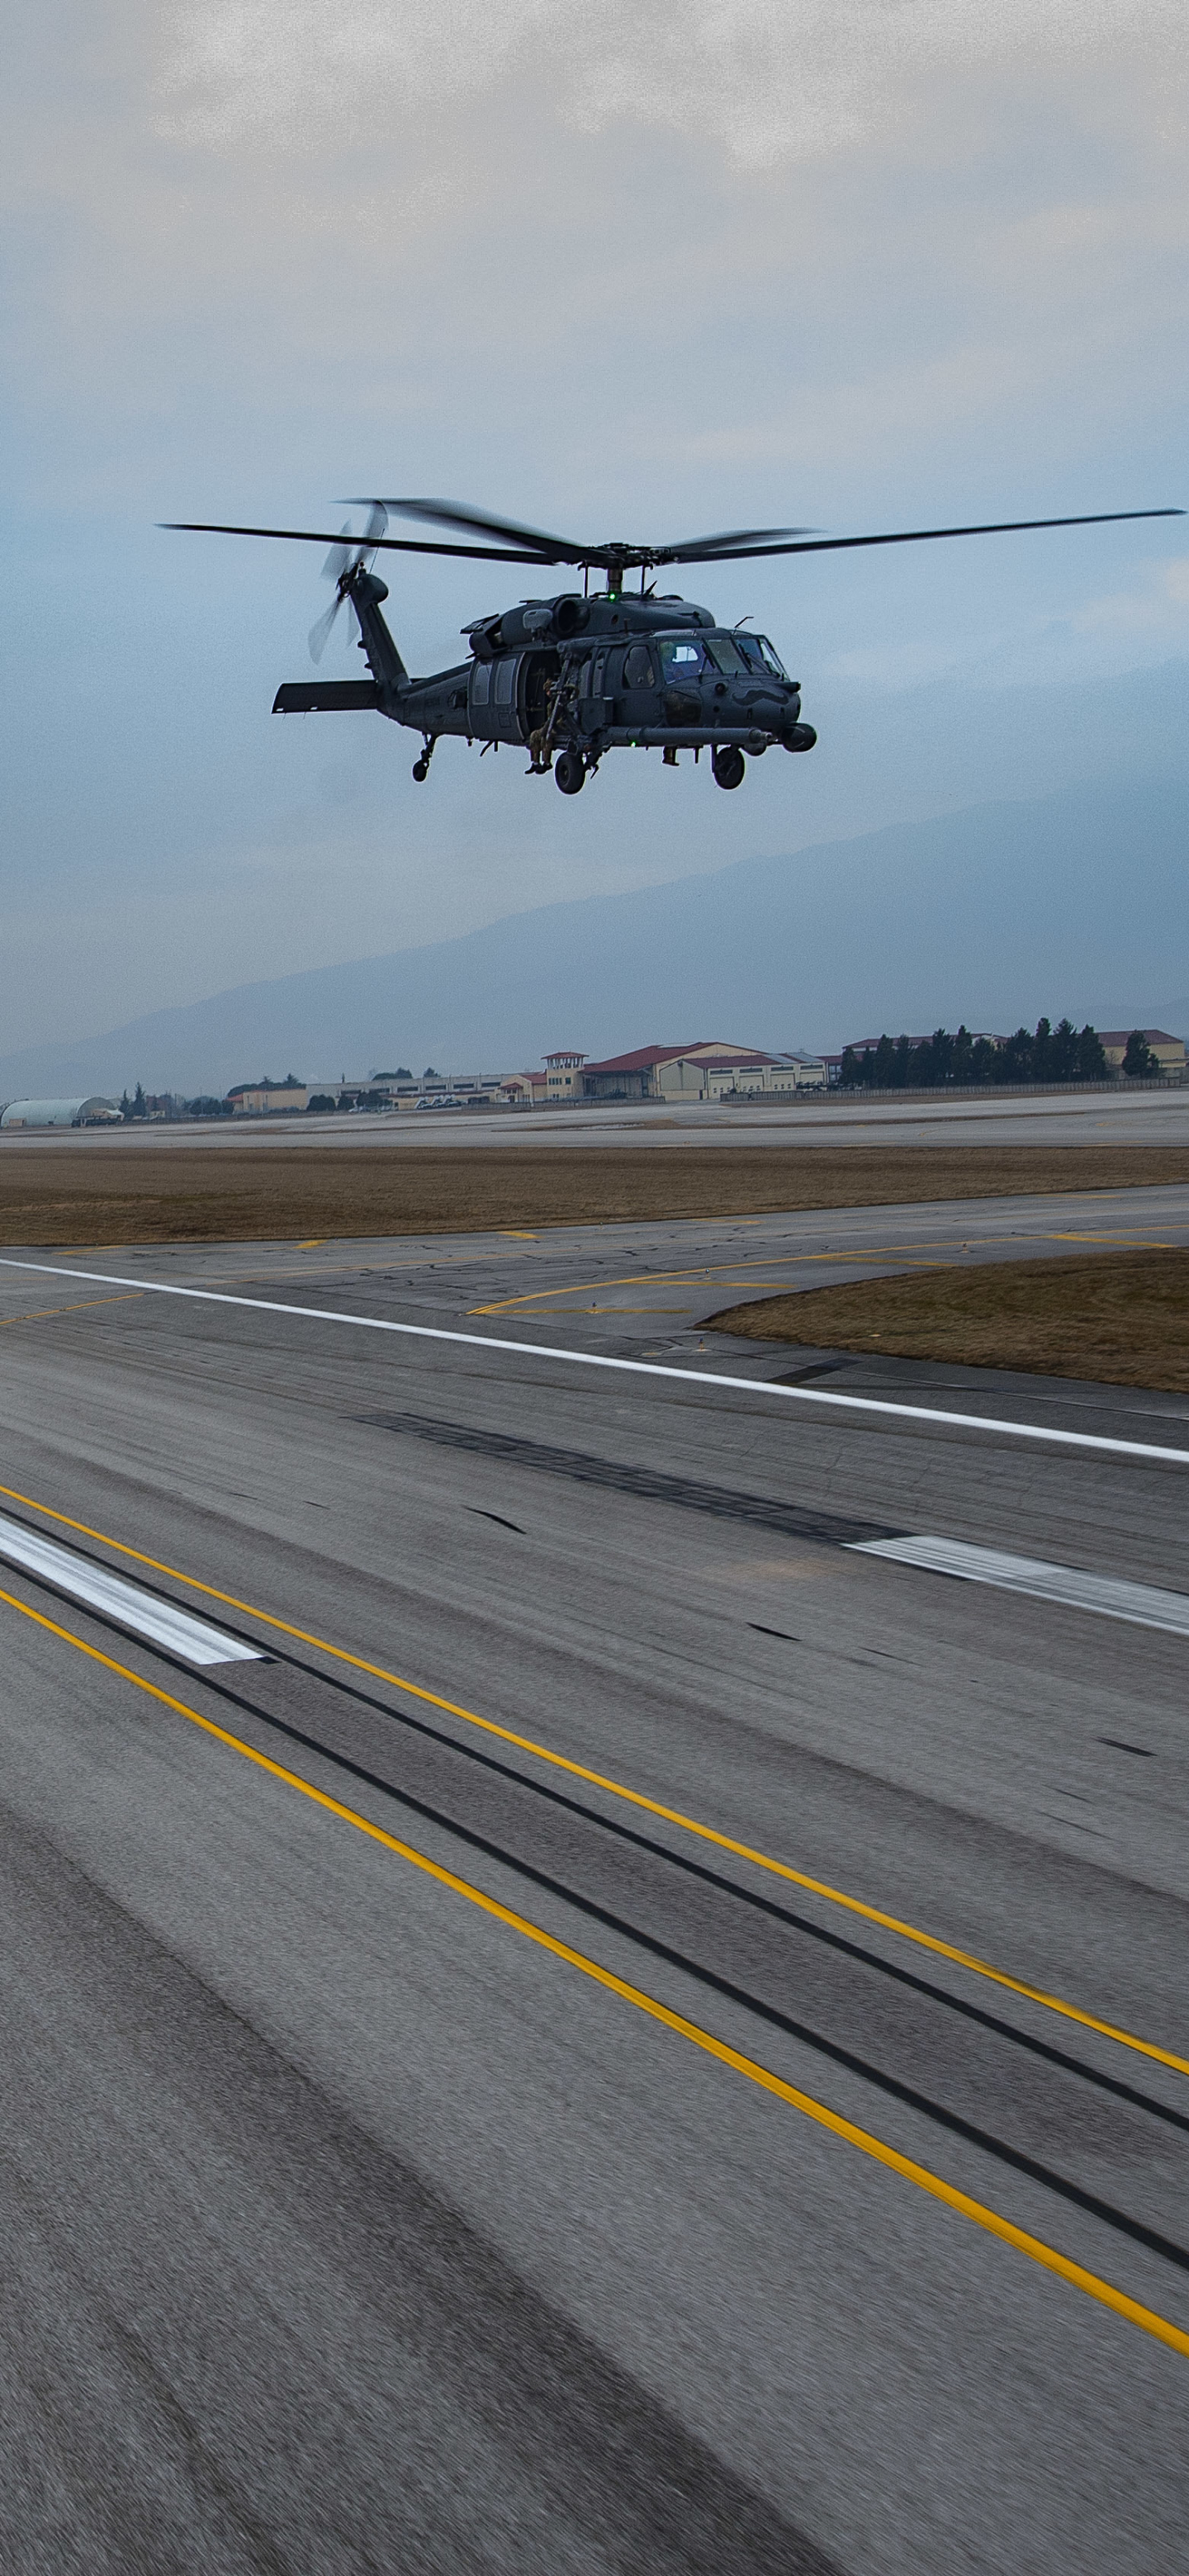 56th Rescue Squadron takeoff from Aviano Air Base by U.S. Department of Defense Current Photos